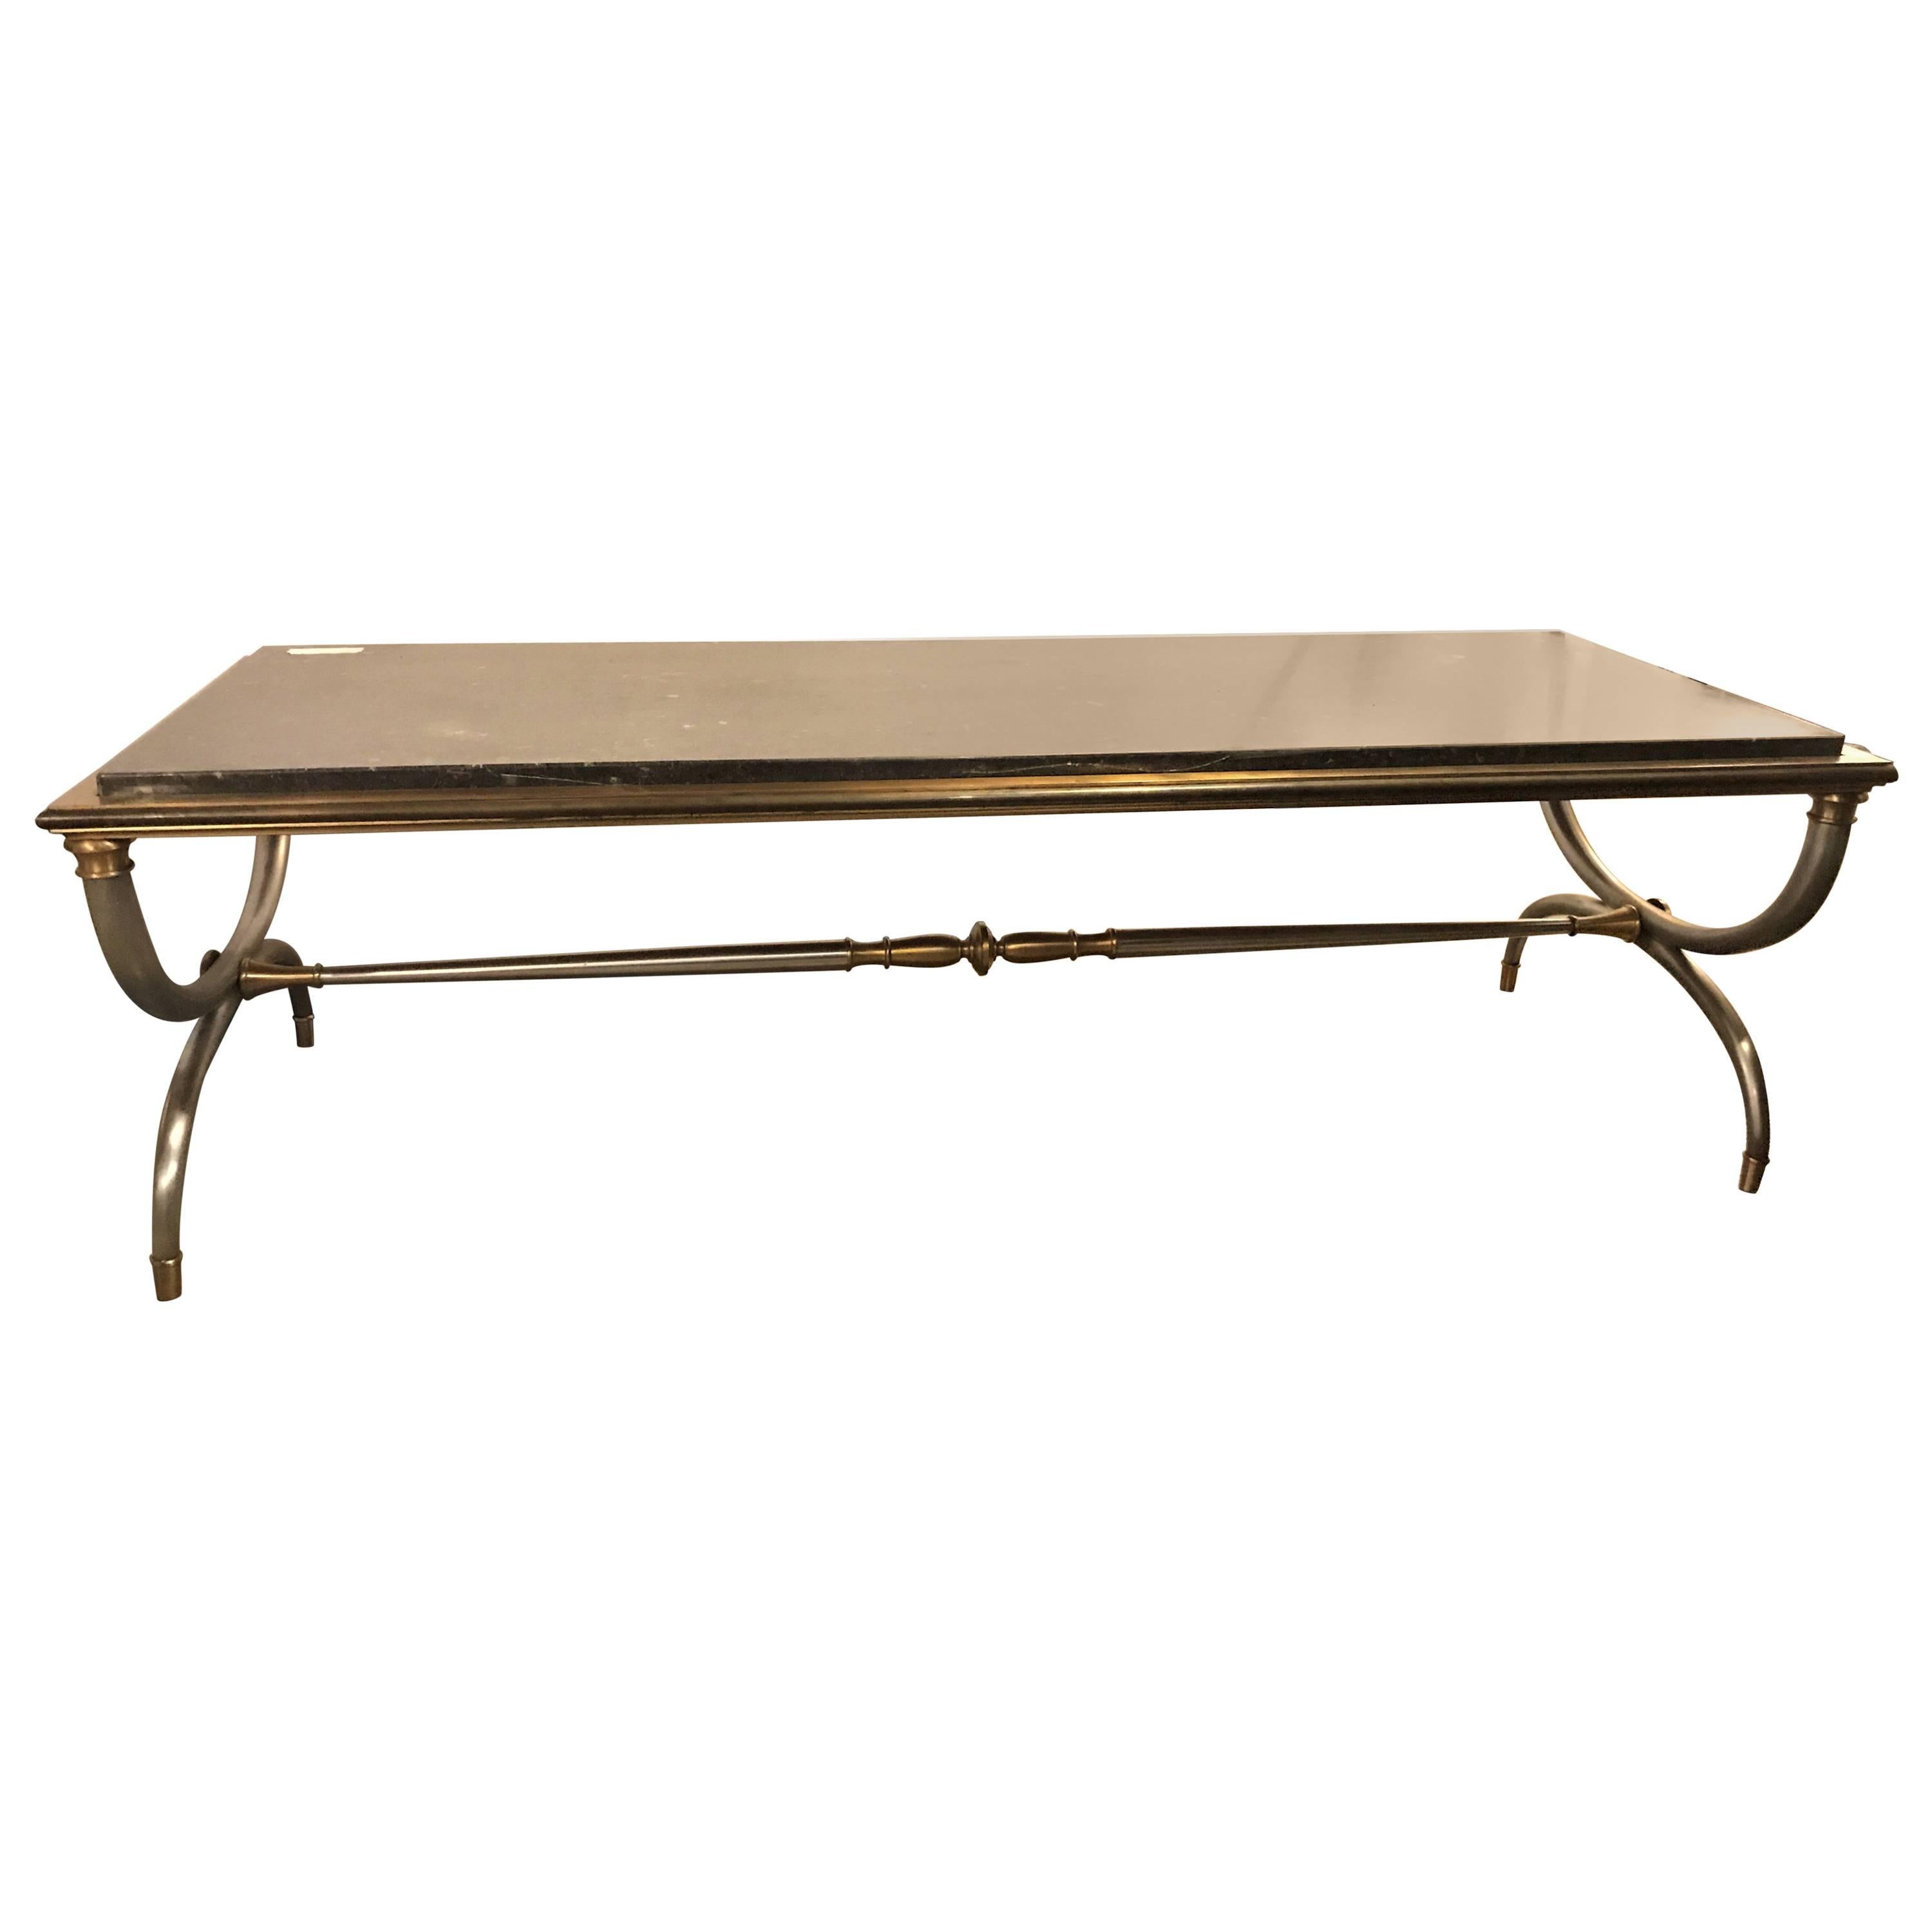 Hollywood Regency Steel and Brass Black Marble-Top Maison Jansen Coffee Table